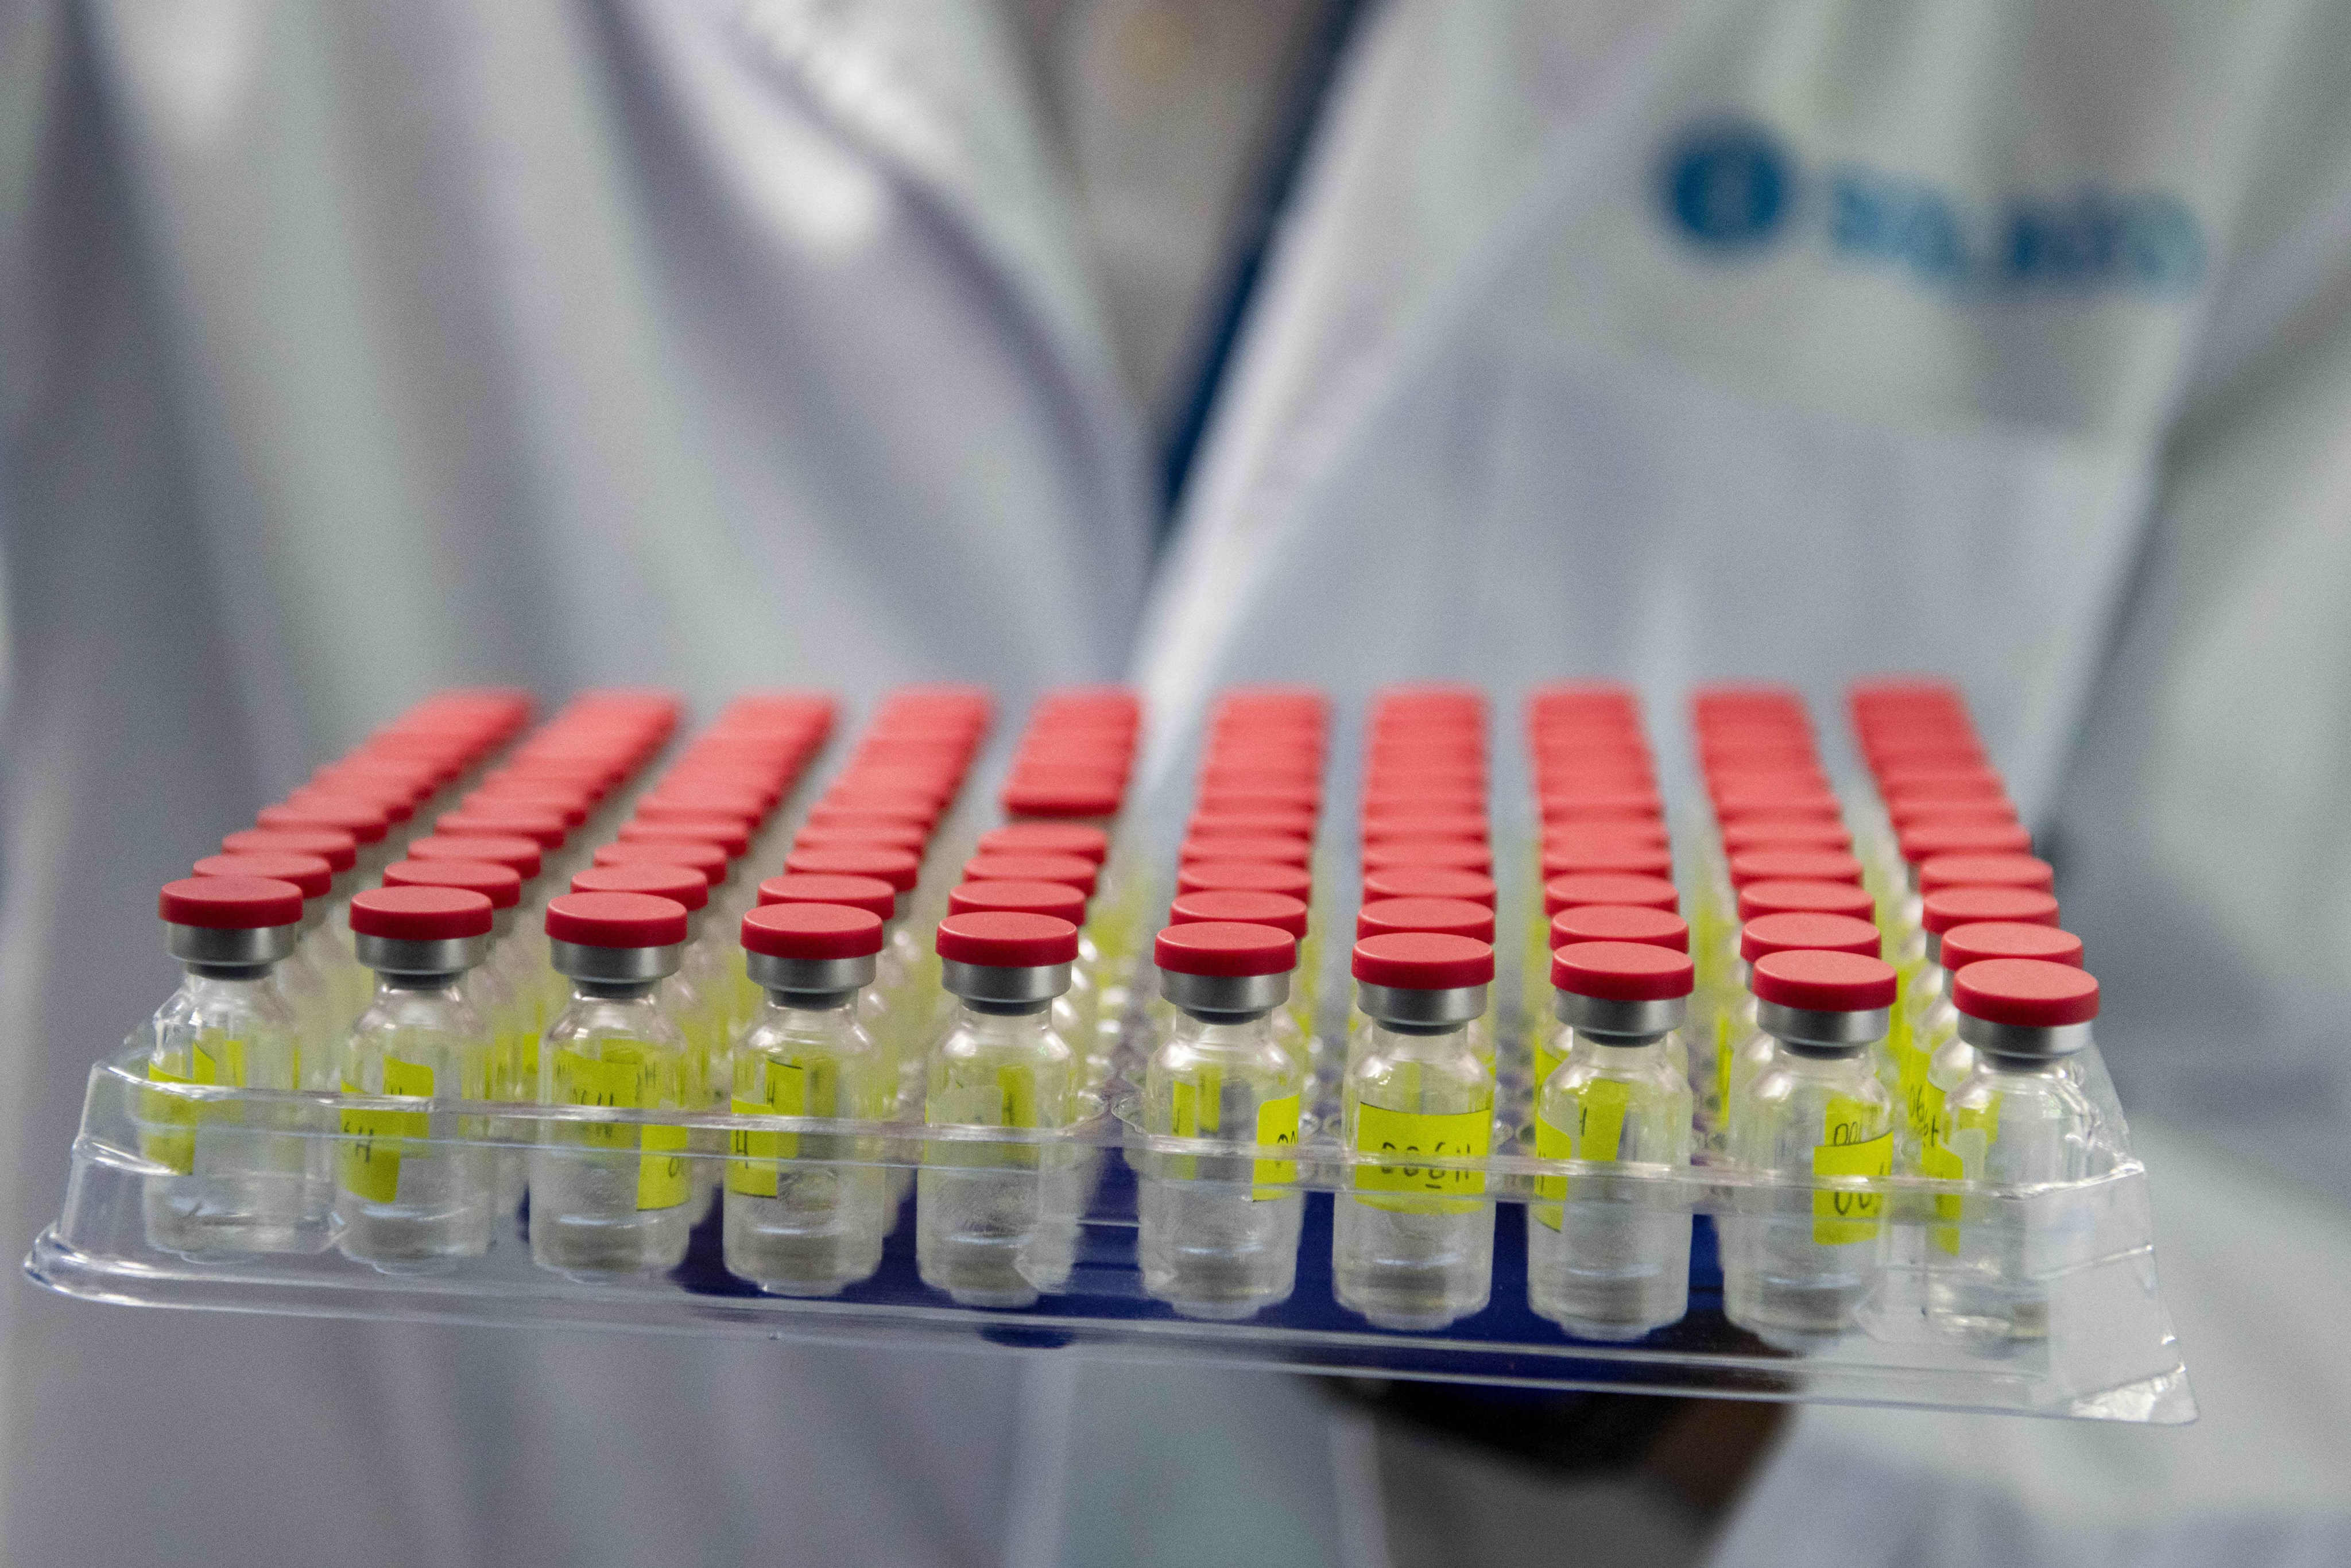 A technician works during a test run of the fill-and-finish process for CanSino vaccines at a Solution Biologics factory in Kuala Lumpur, Malaysia, on September 8, 2021. Photo: Xinhua